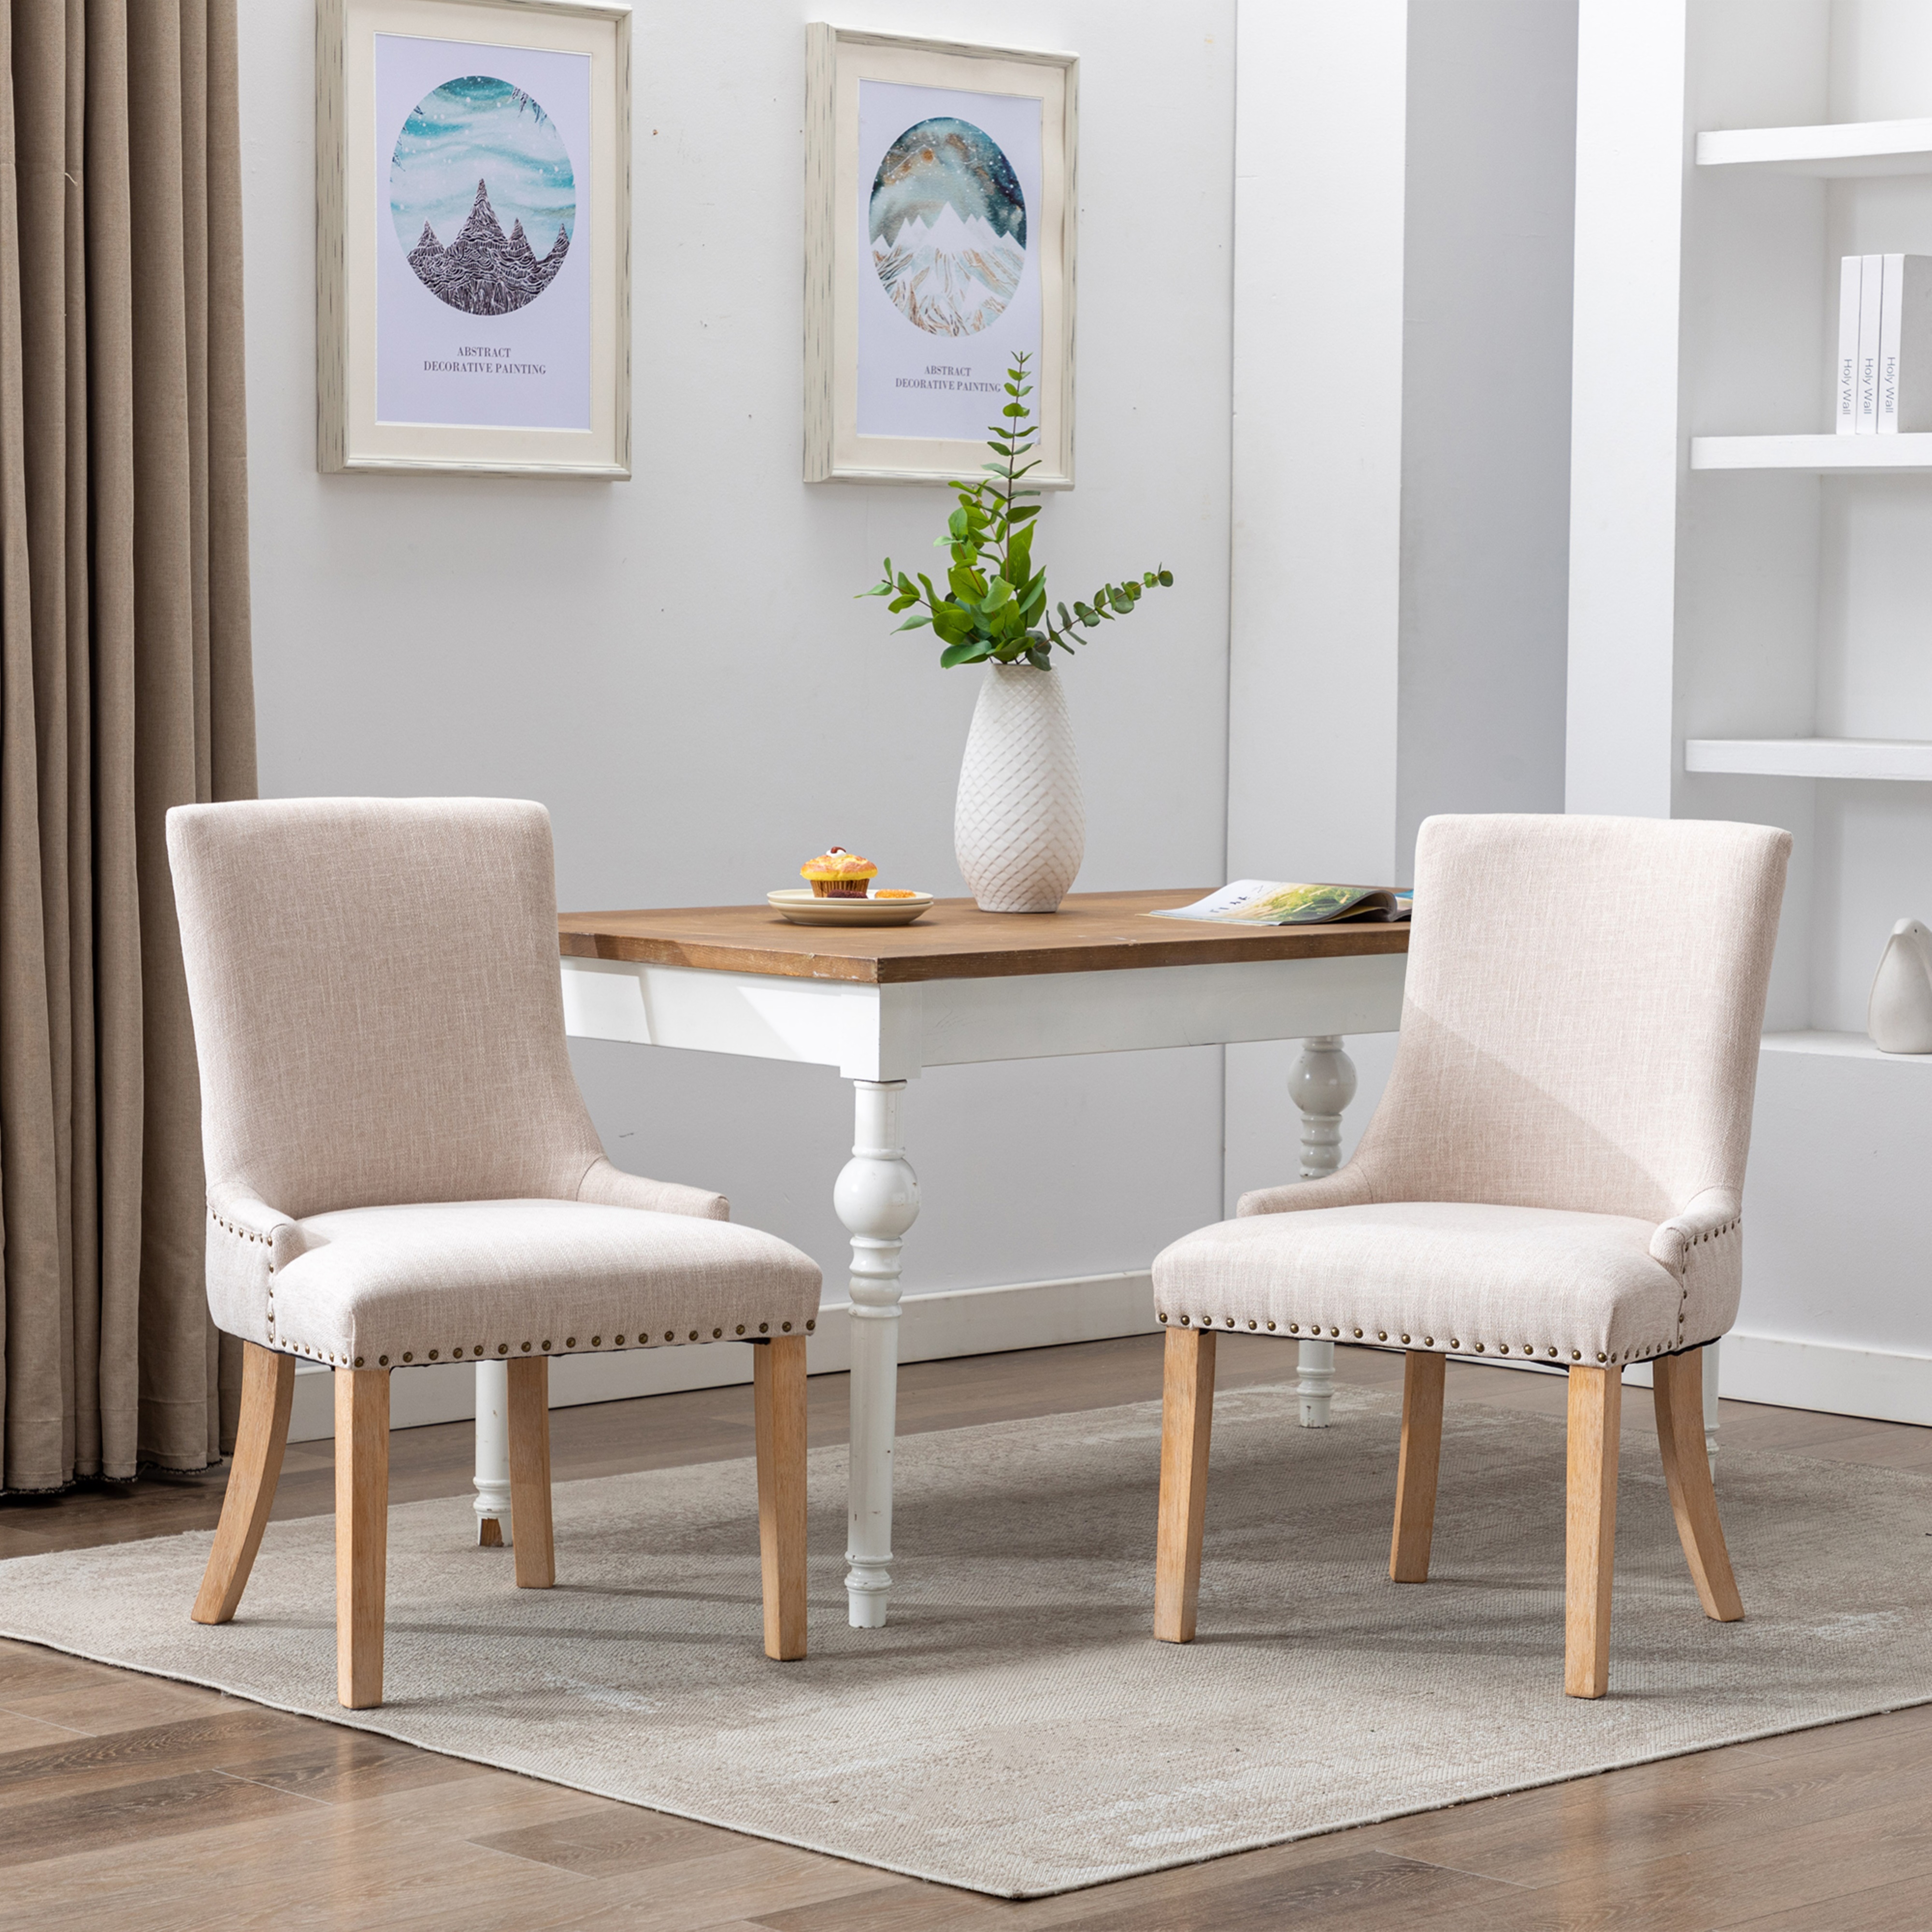 Hengming Set of 2 Fabric Dining Chairs Leisure Padded Chairs with Rubber Wood Legs,Nailed Trim, Beige-CASAINC